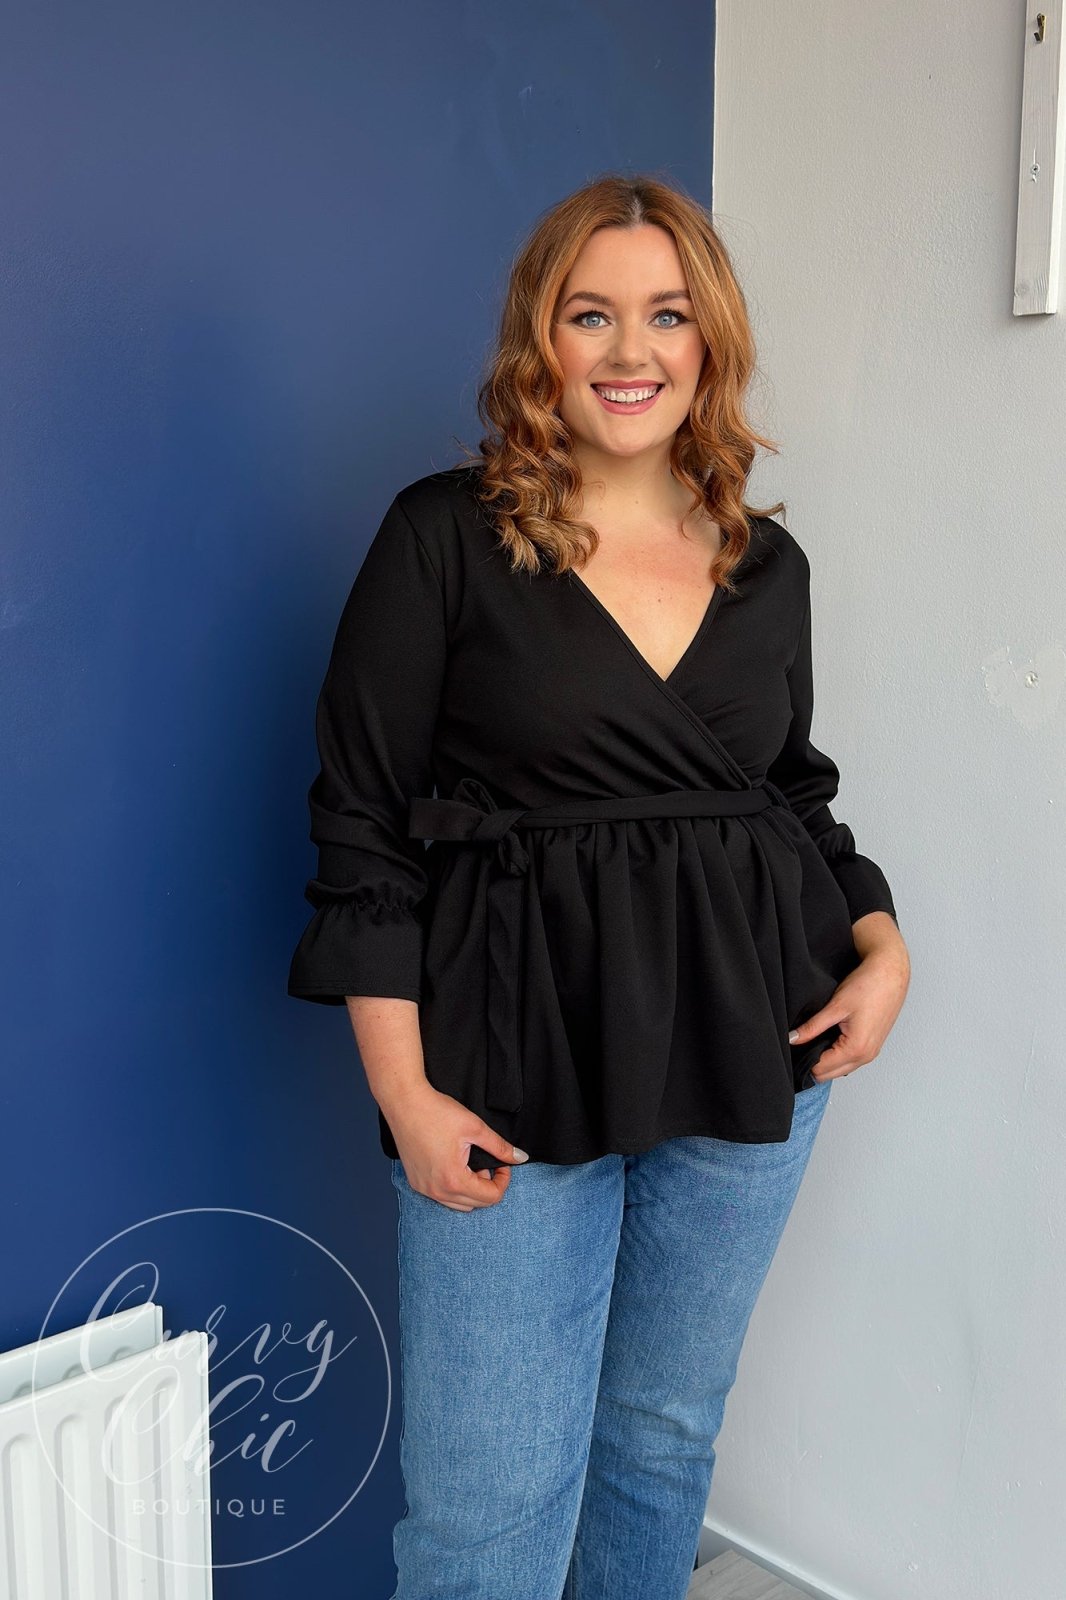 Black Wrap Plus Size Peplum Top with sleeves